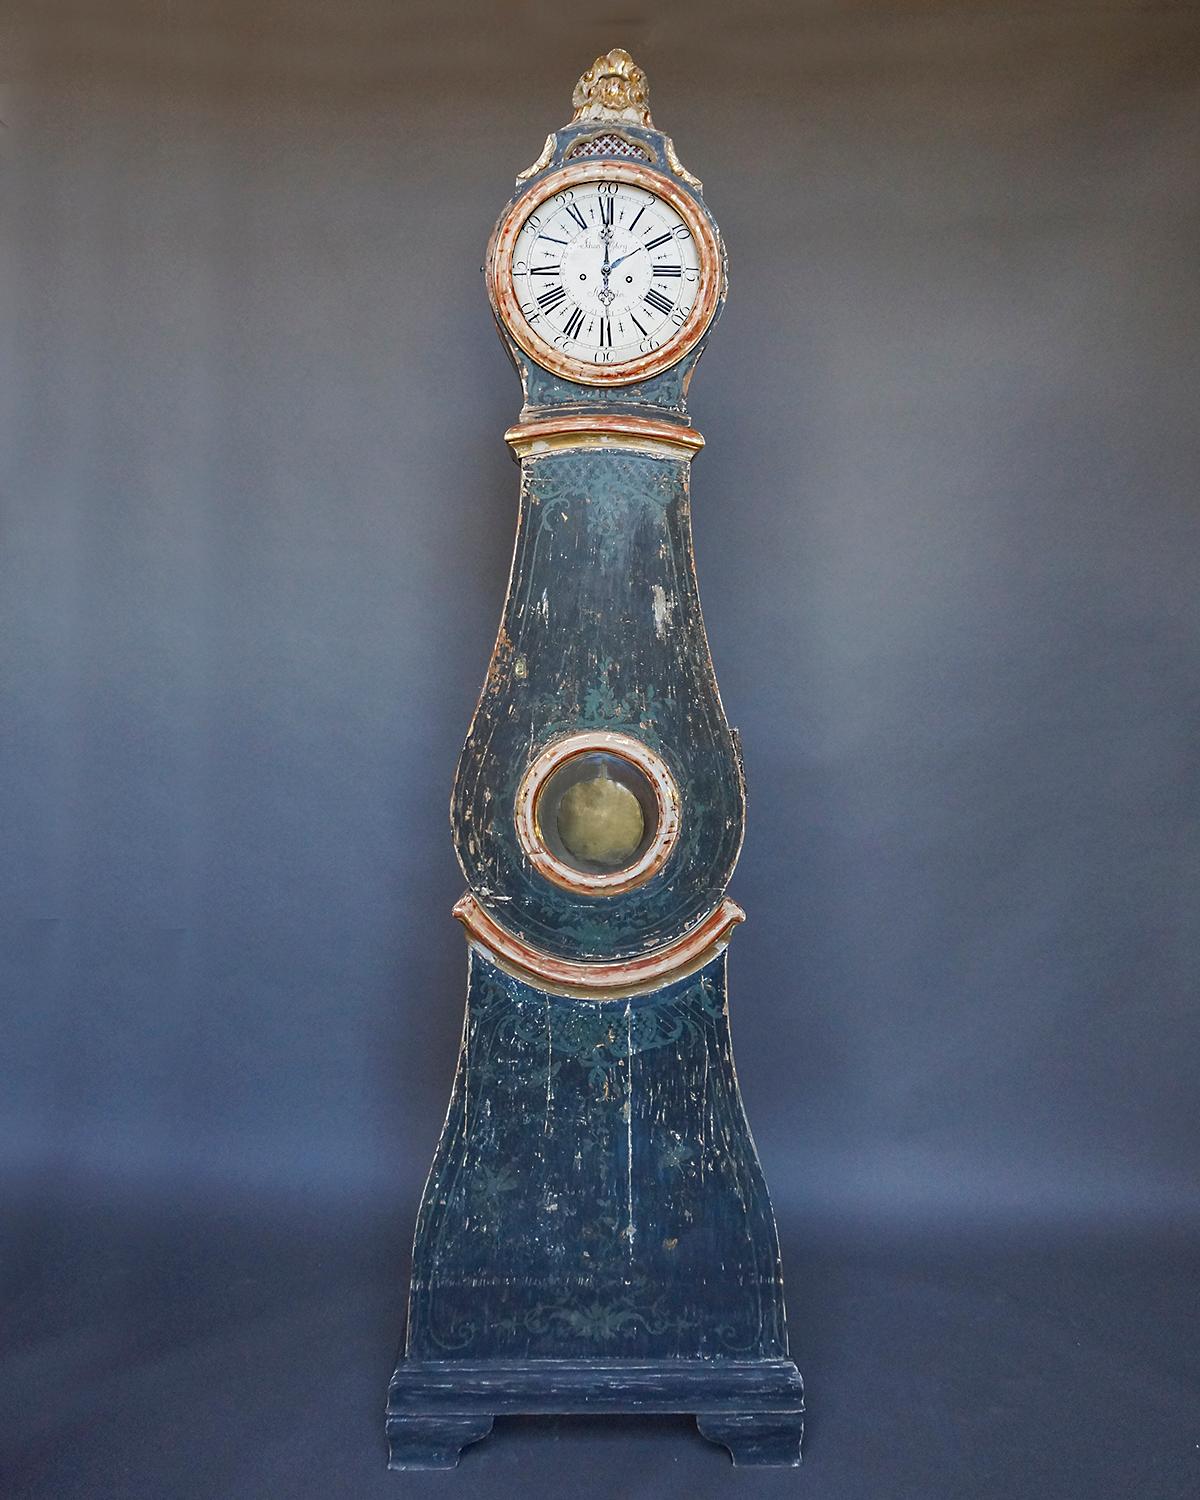 Swedish tall case clock by Johan Nyberg, master clock maker active in Stockholm from 1787 to 1801. The clockworks are more advanced than most examples from the period, having an integral calendar and a signature on the beautifully painted dial. The